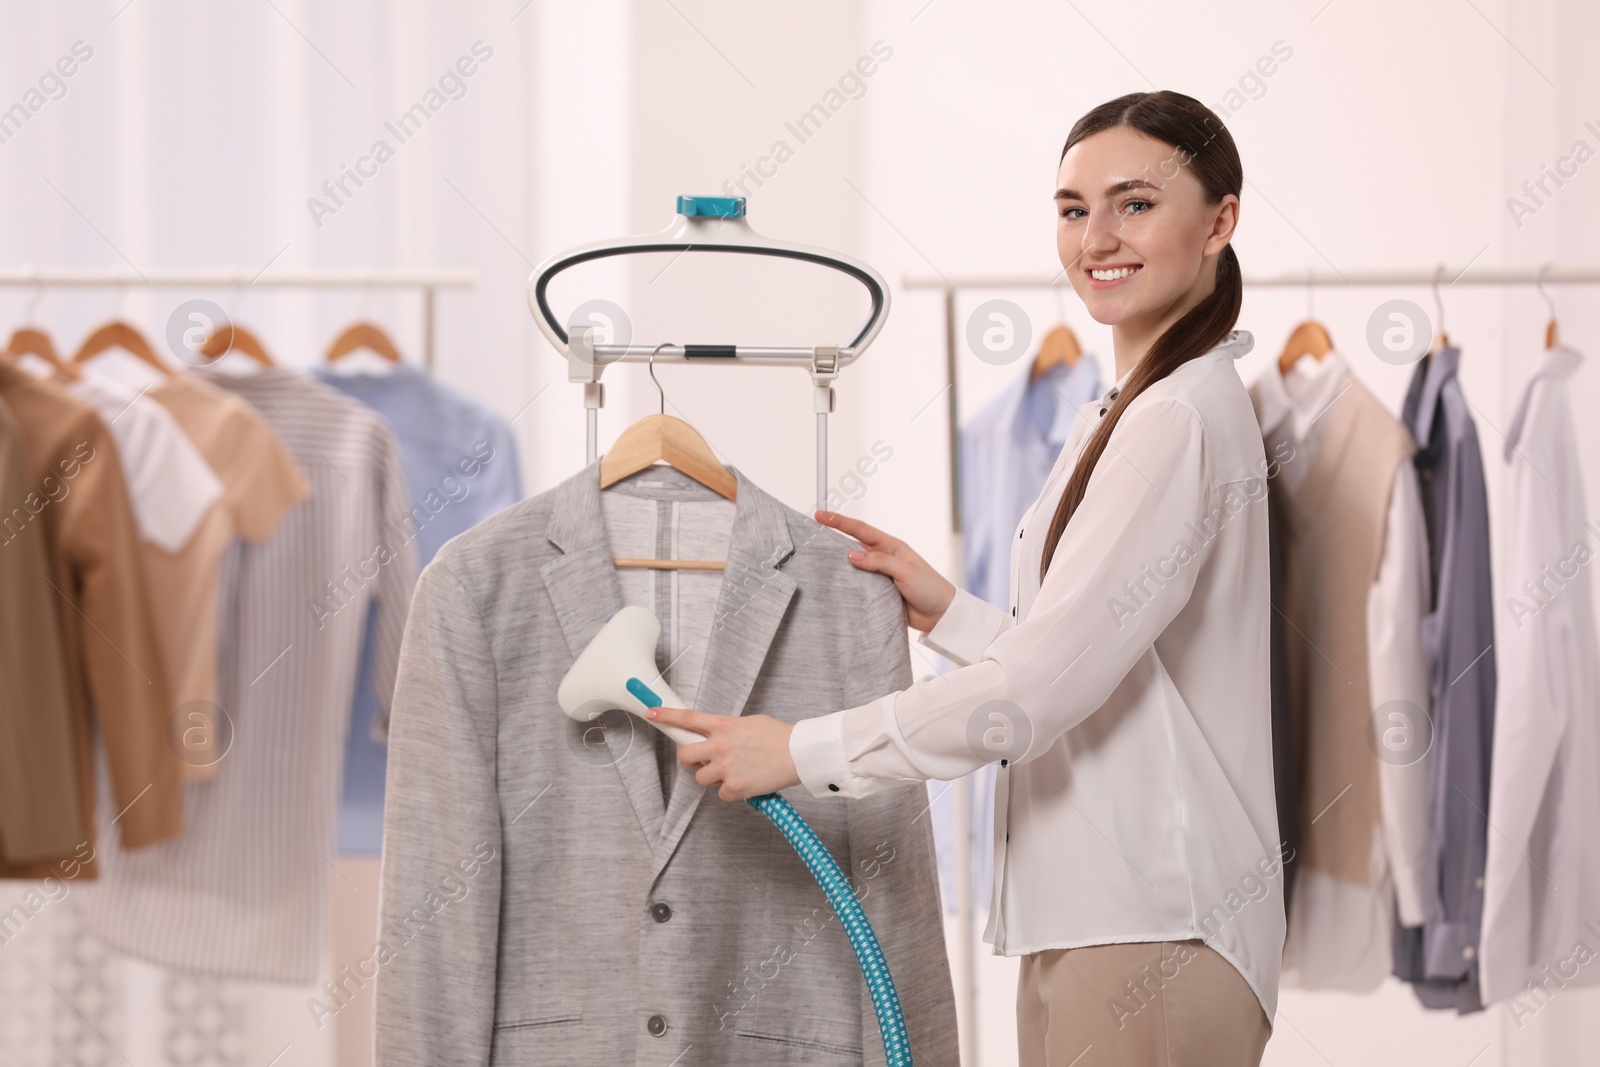 Photo of Woman steaming jacket on hanger in room